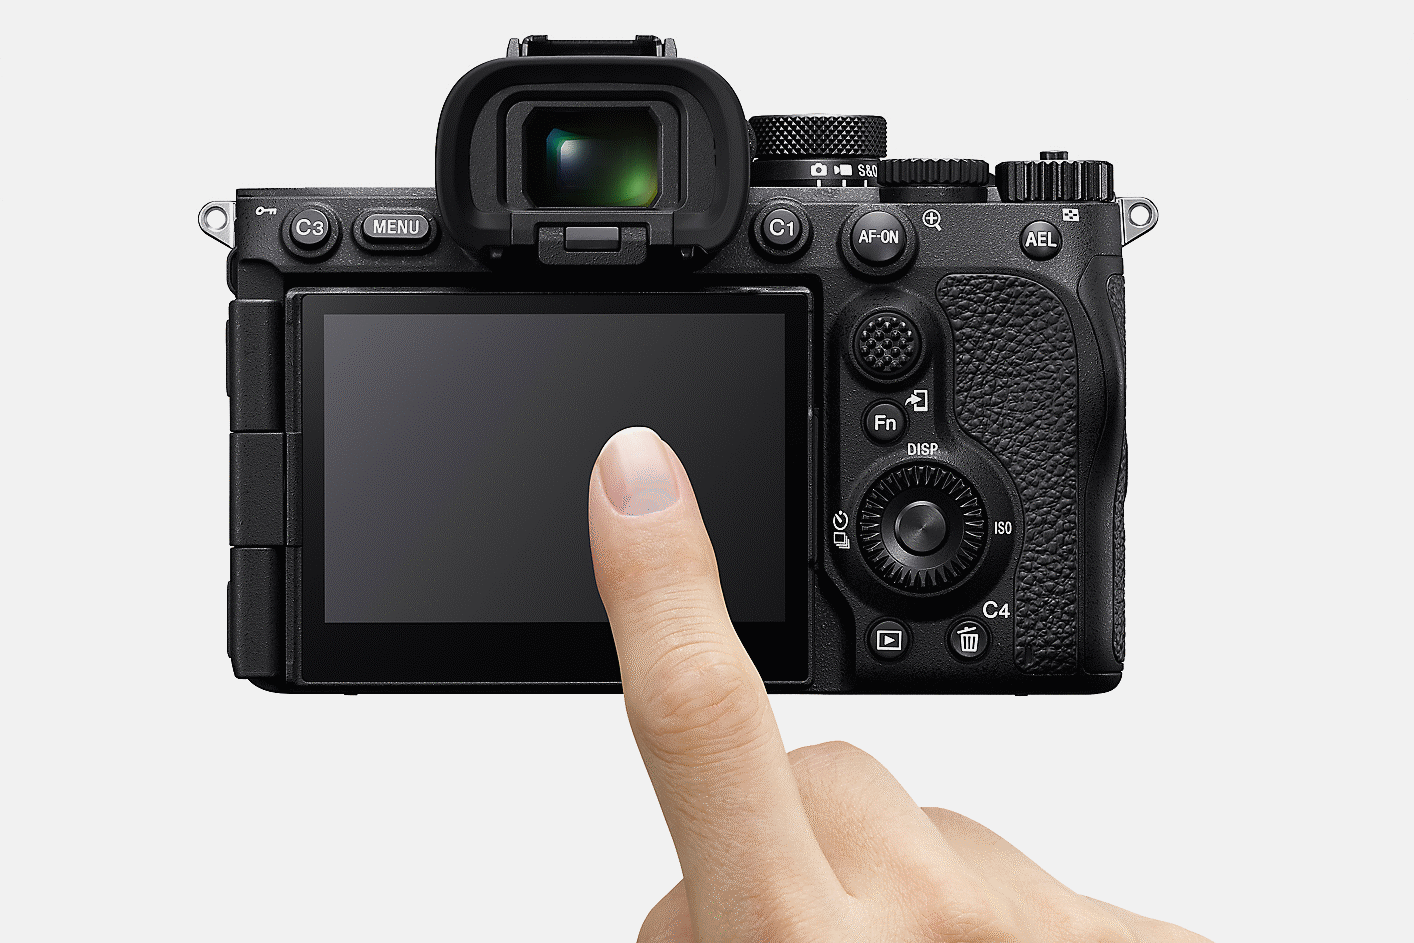 Image of the camera's LCD panel and a finger touching it